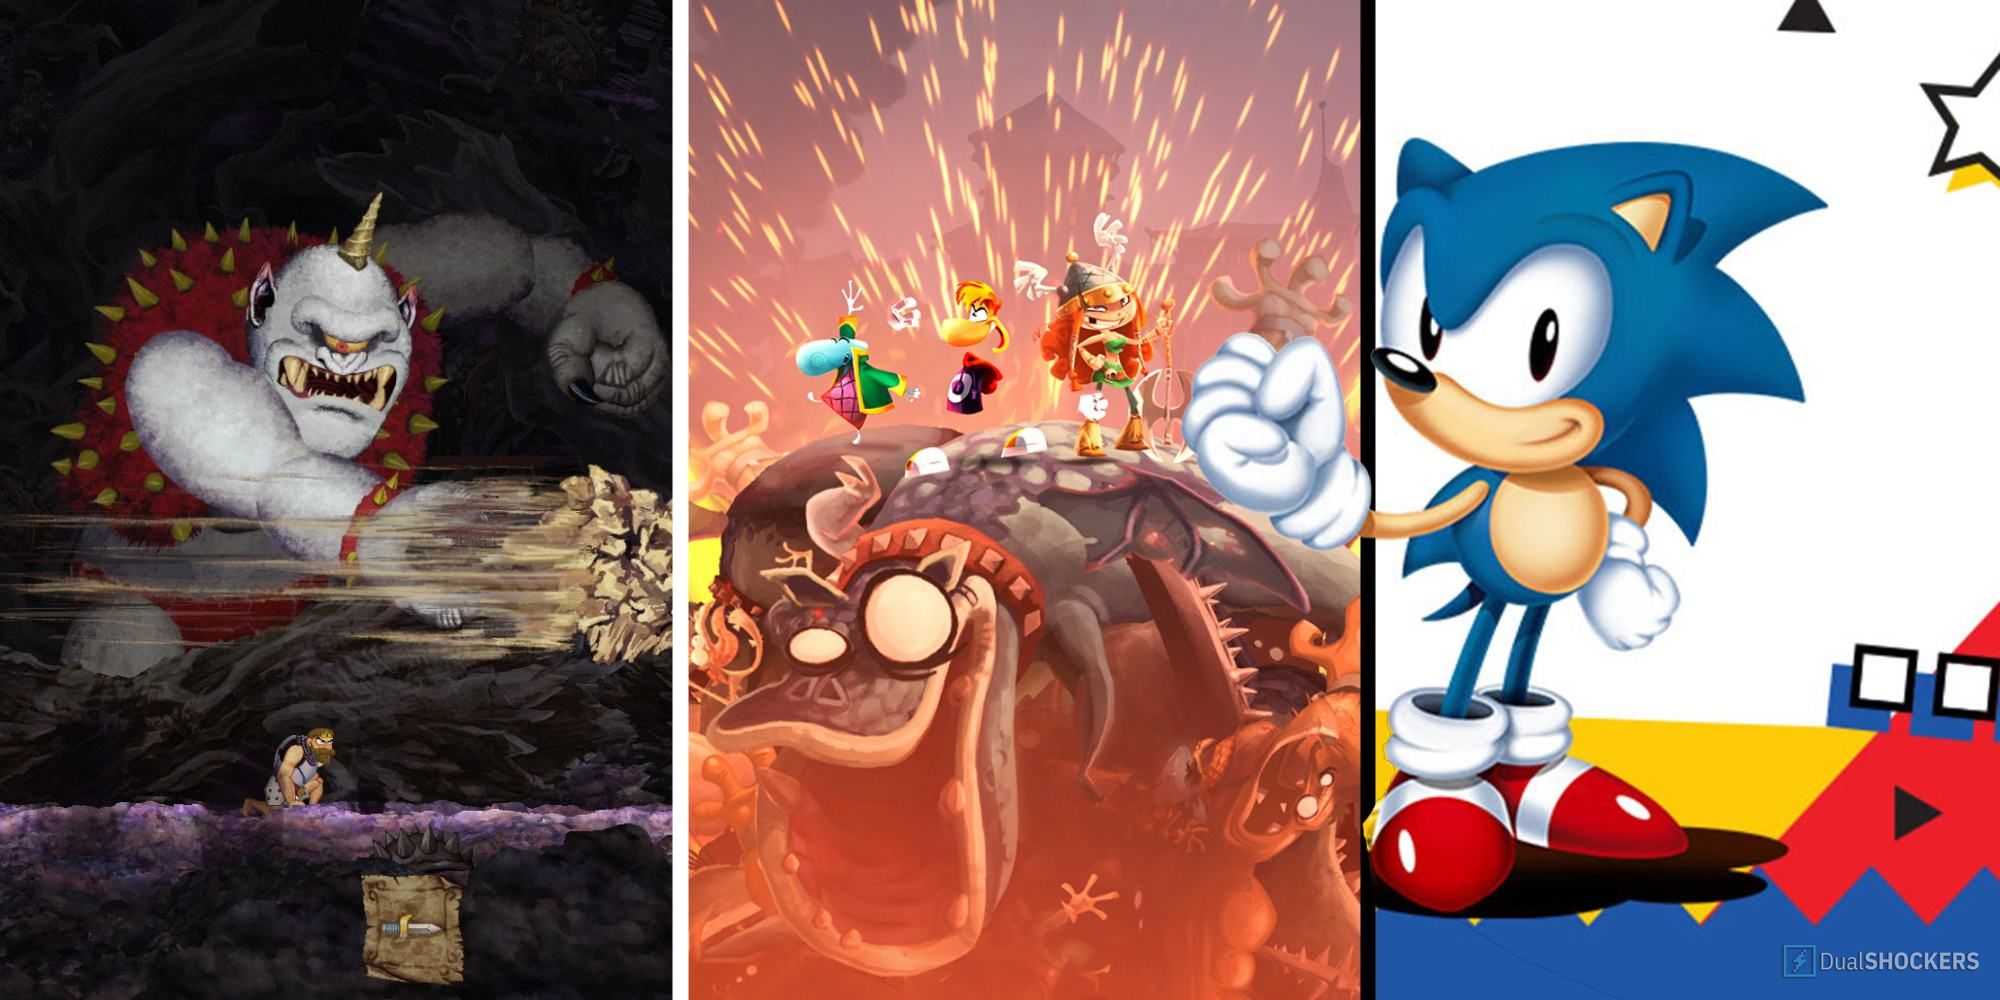 Split image a cyclops attacking Arthur, Rayman standing on a pile of monsters, Sonic smiling with a raised fist